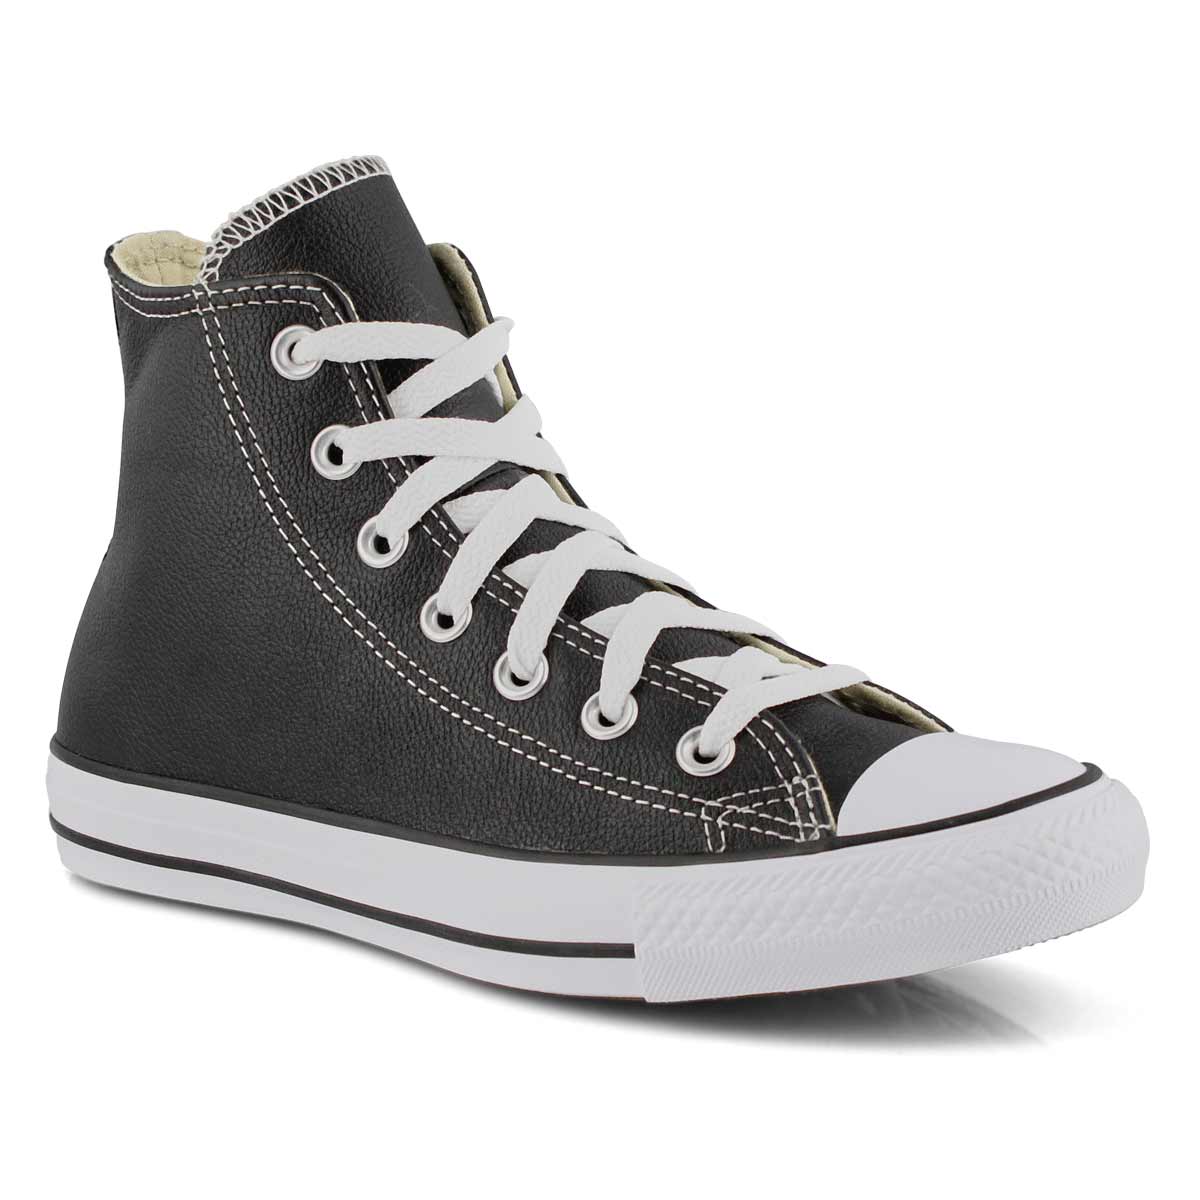 Converse Women's CT ALL STAR LEATHER black hi tops